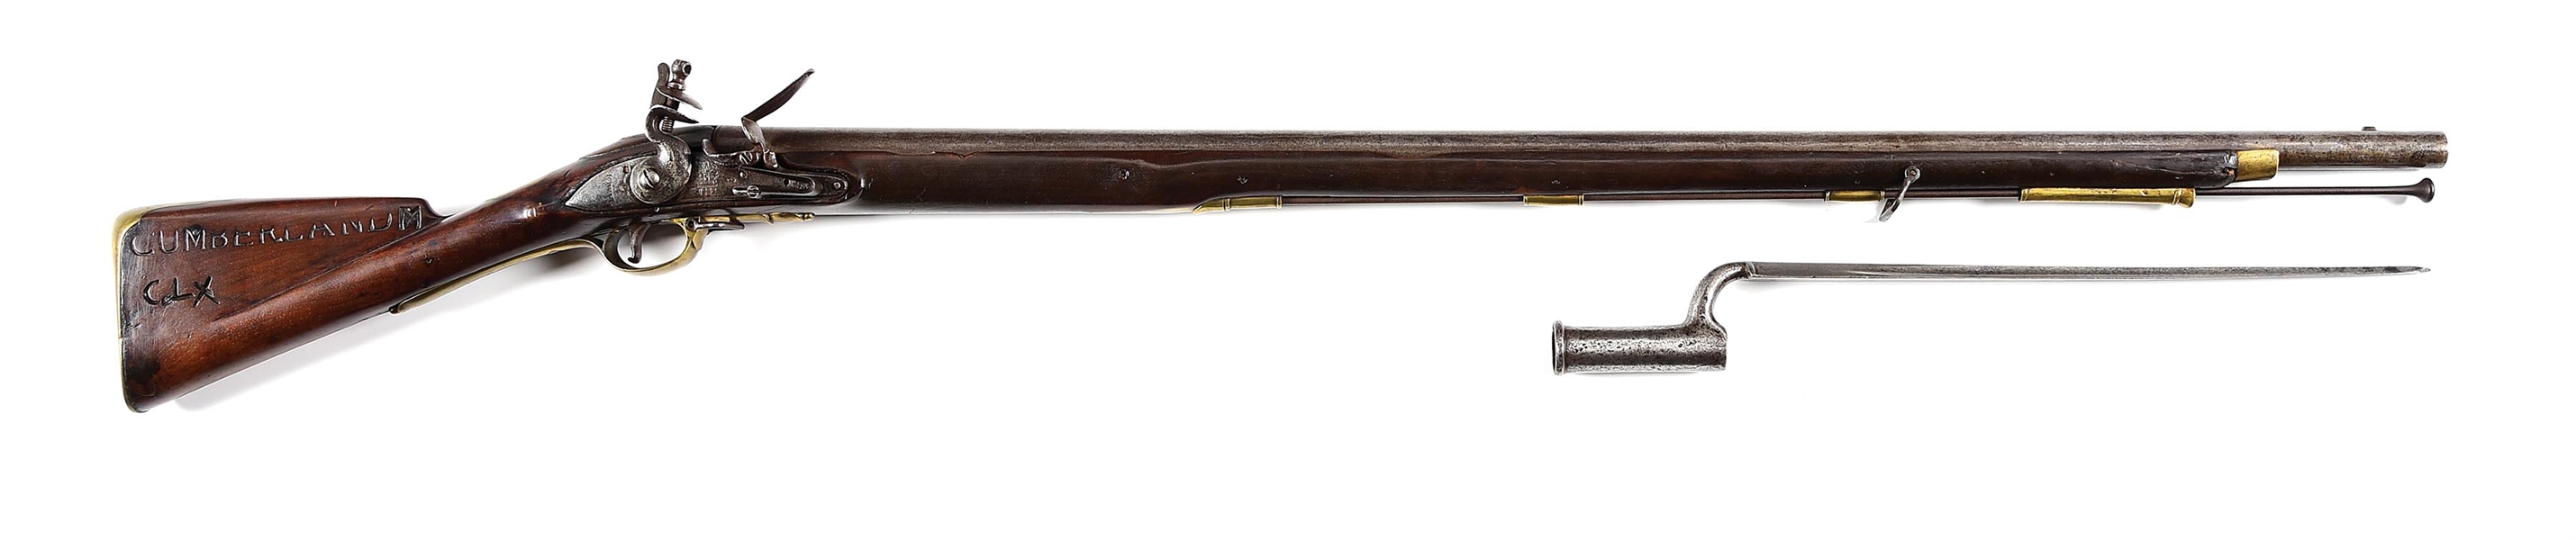 (A) BRITISH PATTERN 1779-S SHORT LAND MUSKET WITH CANADIAN BRAND AND BAYONET.